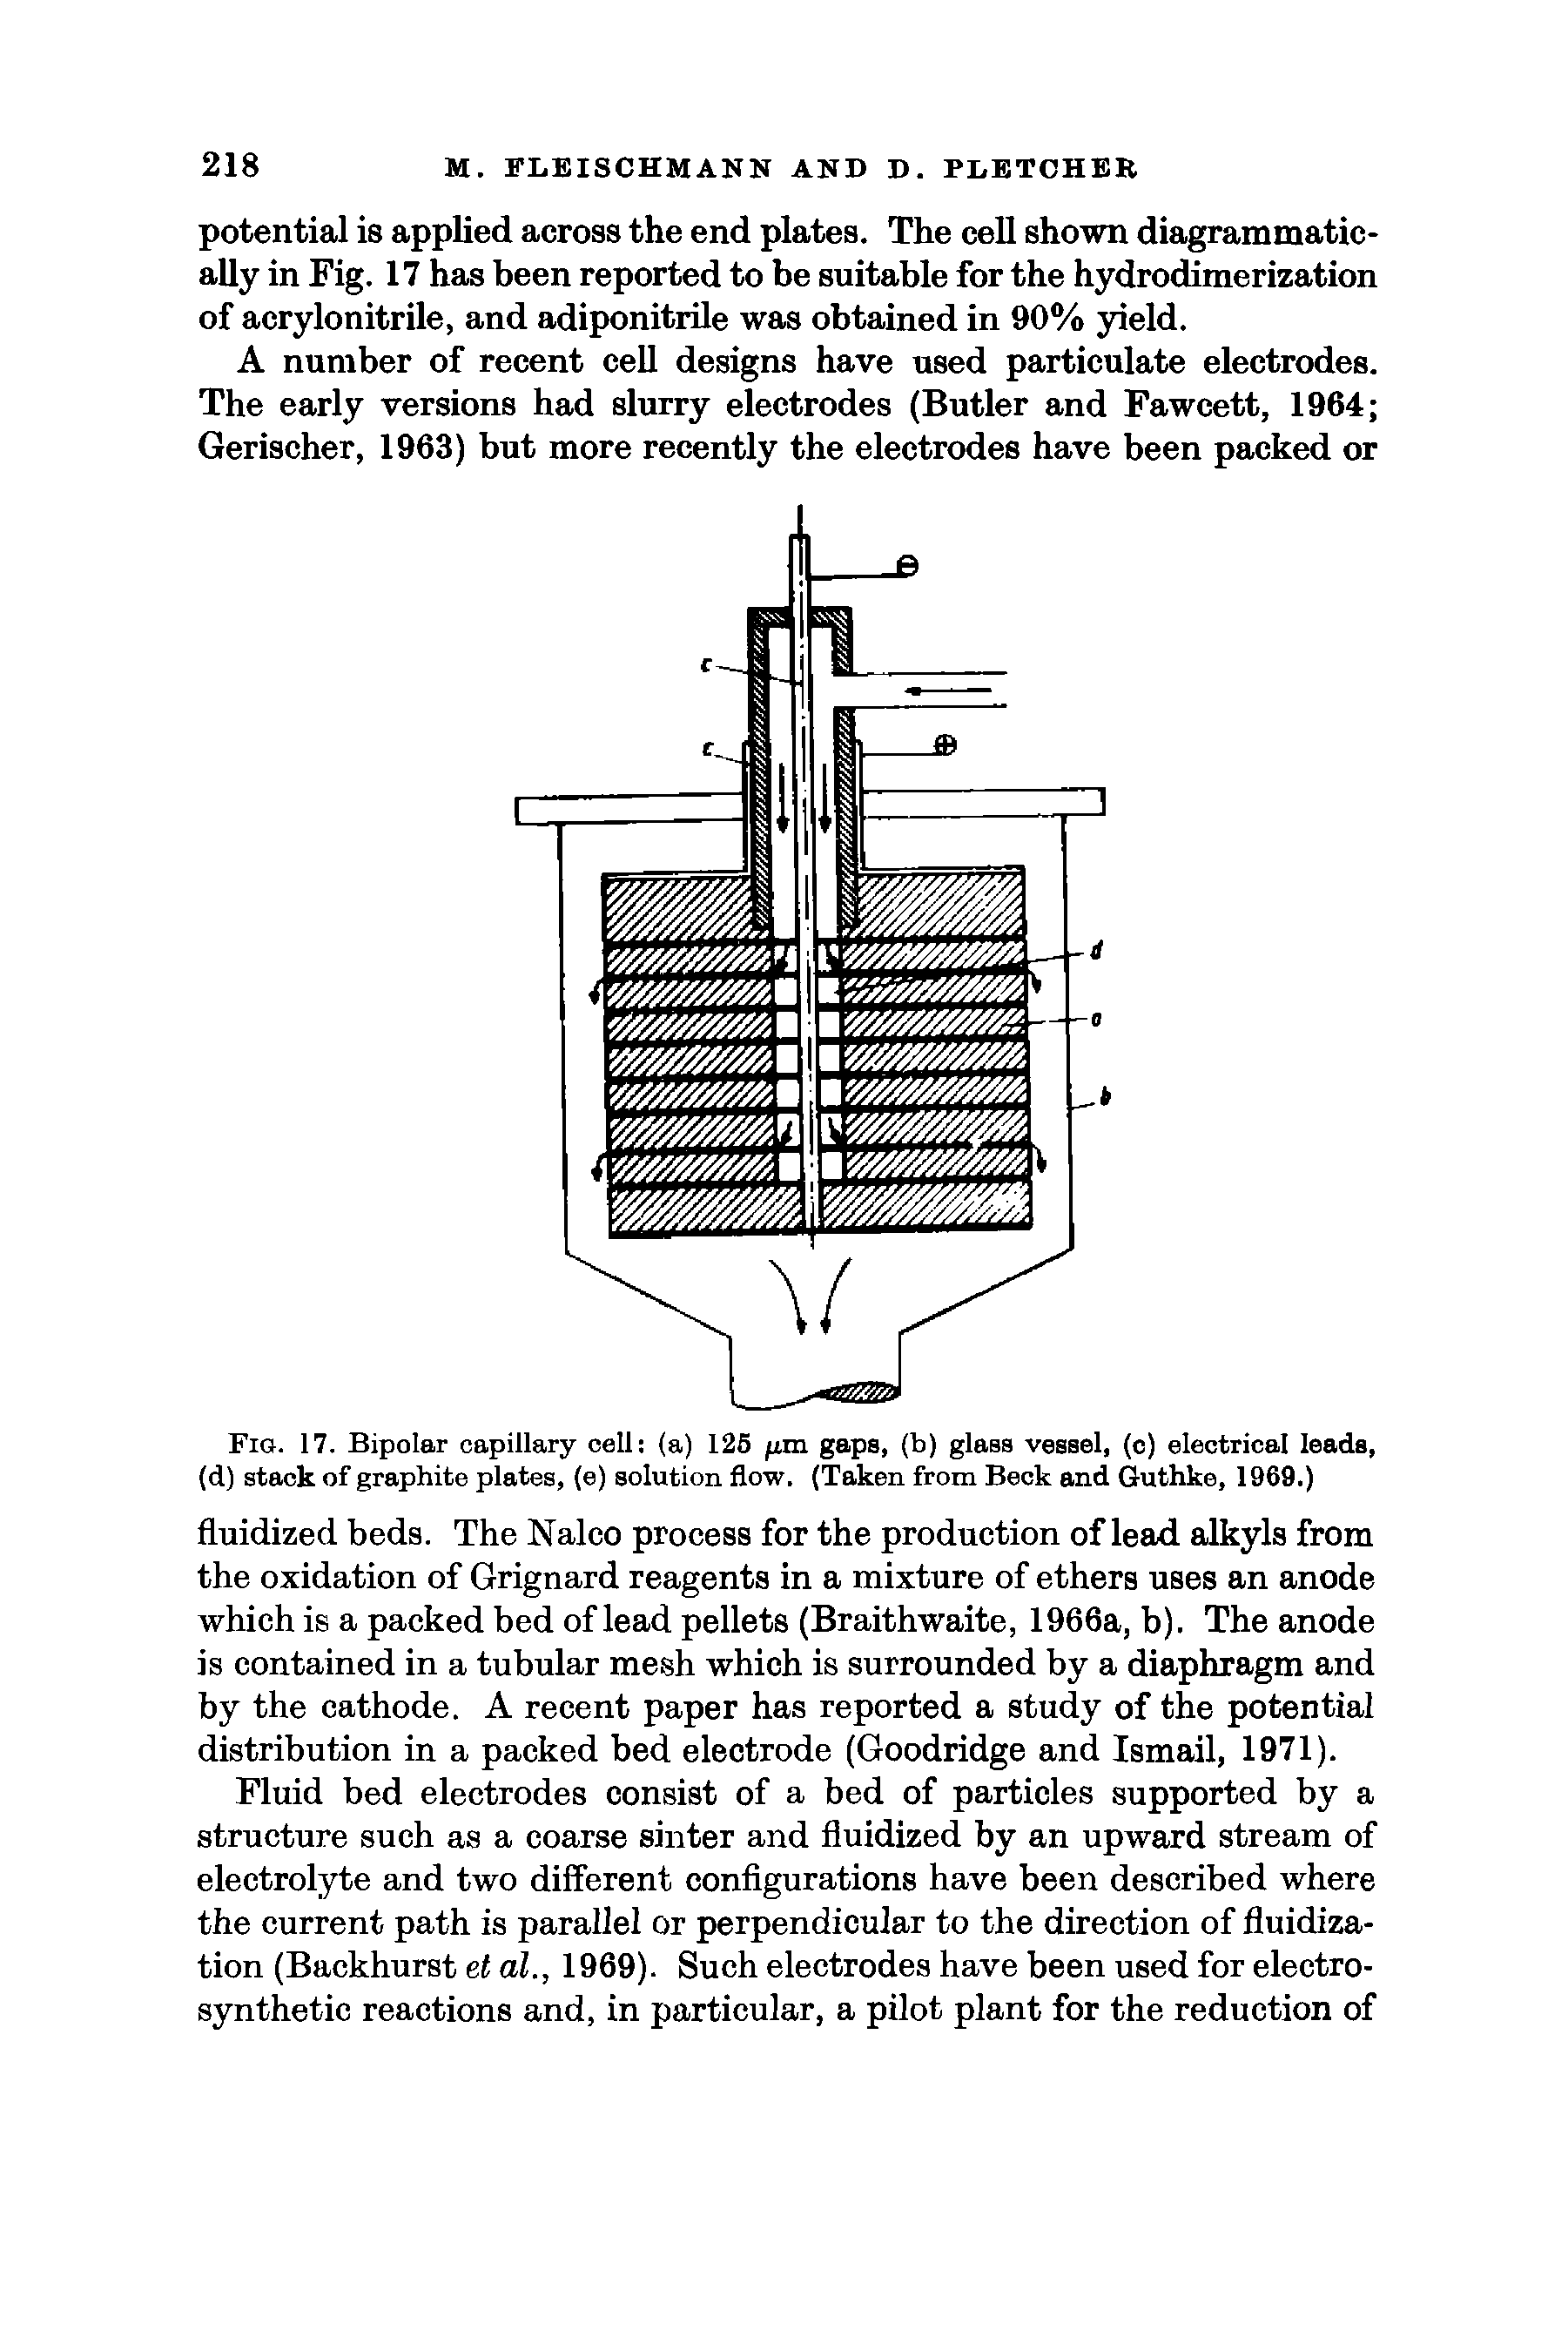 Fig. 17. Bipolar capillary cell (a) 125 fim gaps, (b) glass vessel, (o) electrical leads, (d) stack of graphite plates, (e) solution flow. (Taken from Beck and Guthke, 1969.)...